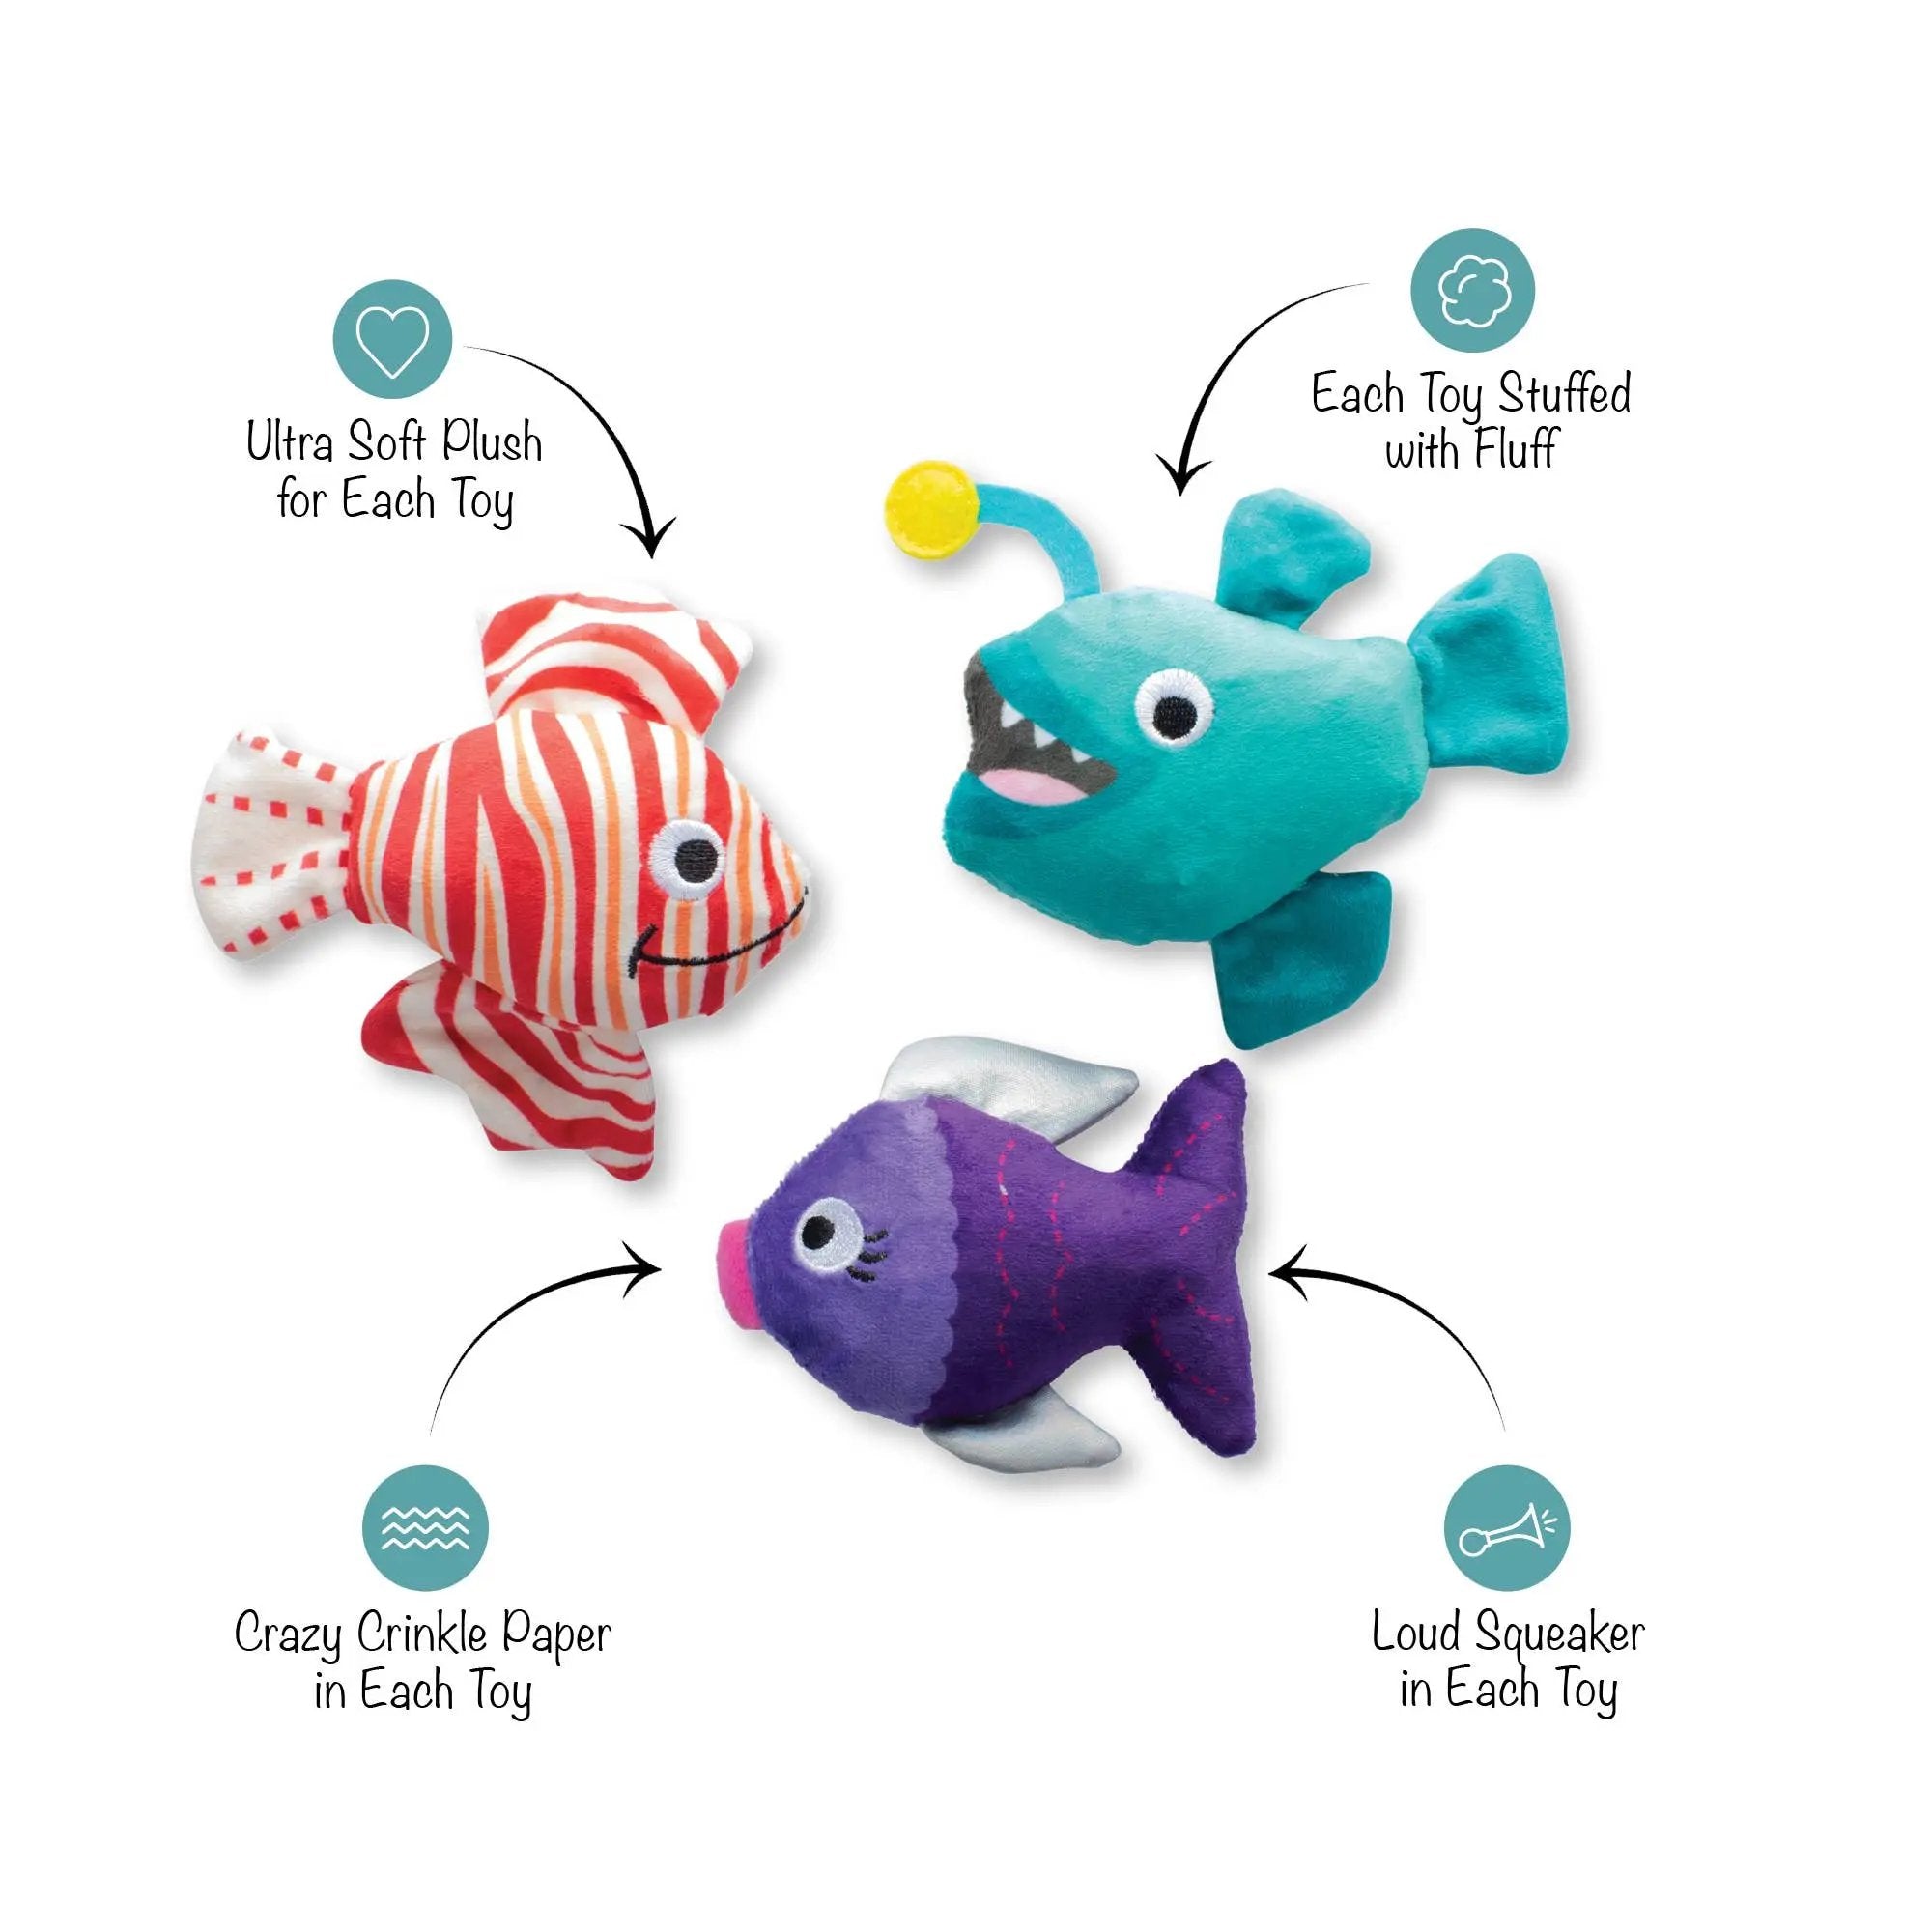 Petshop By Fringe Studio Any Fin is Possible 3 Piece Small Dog Toy Set